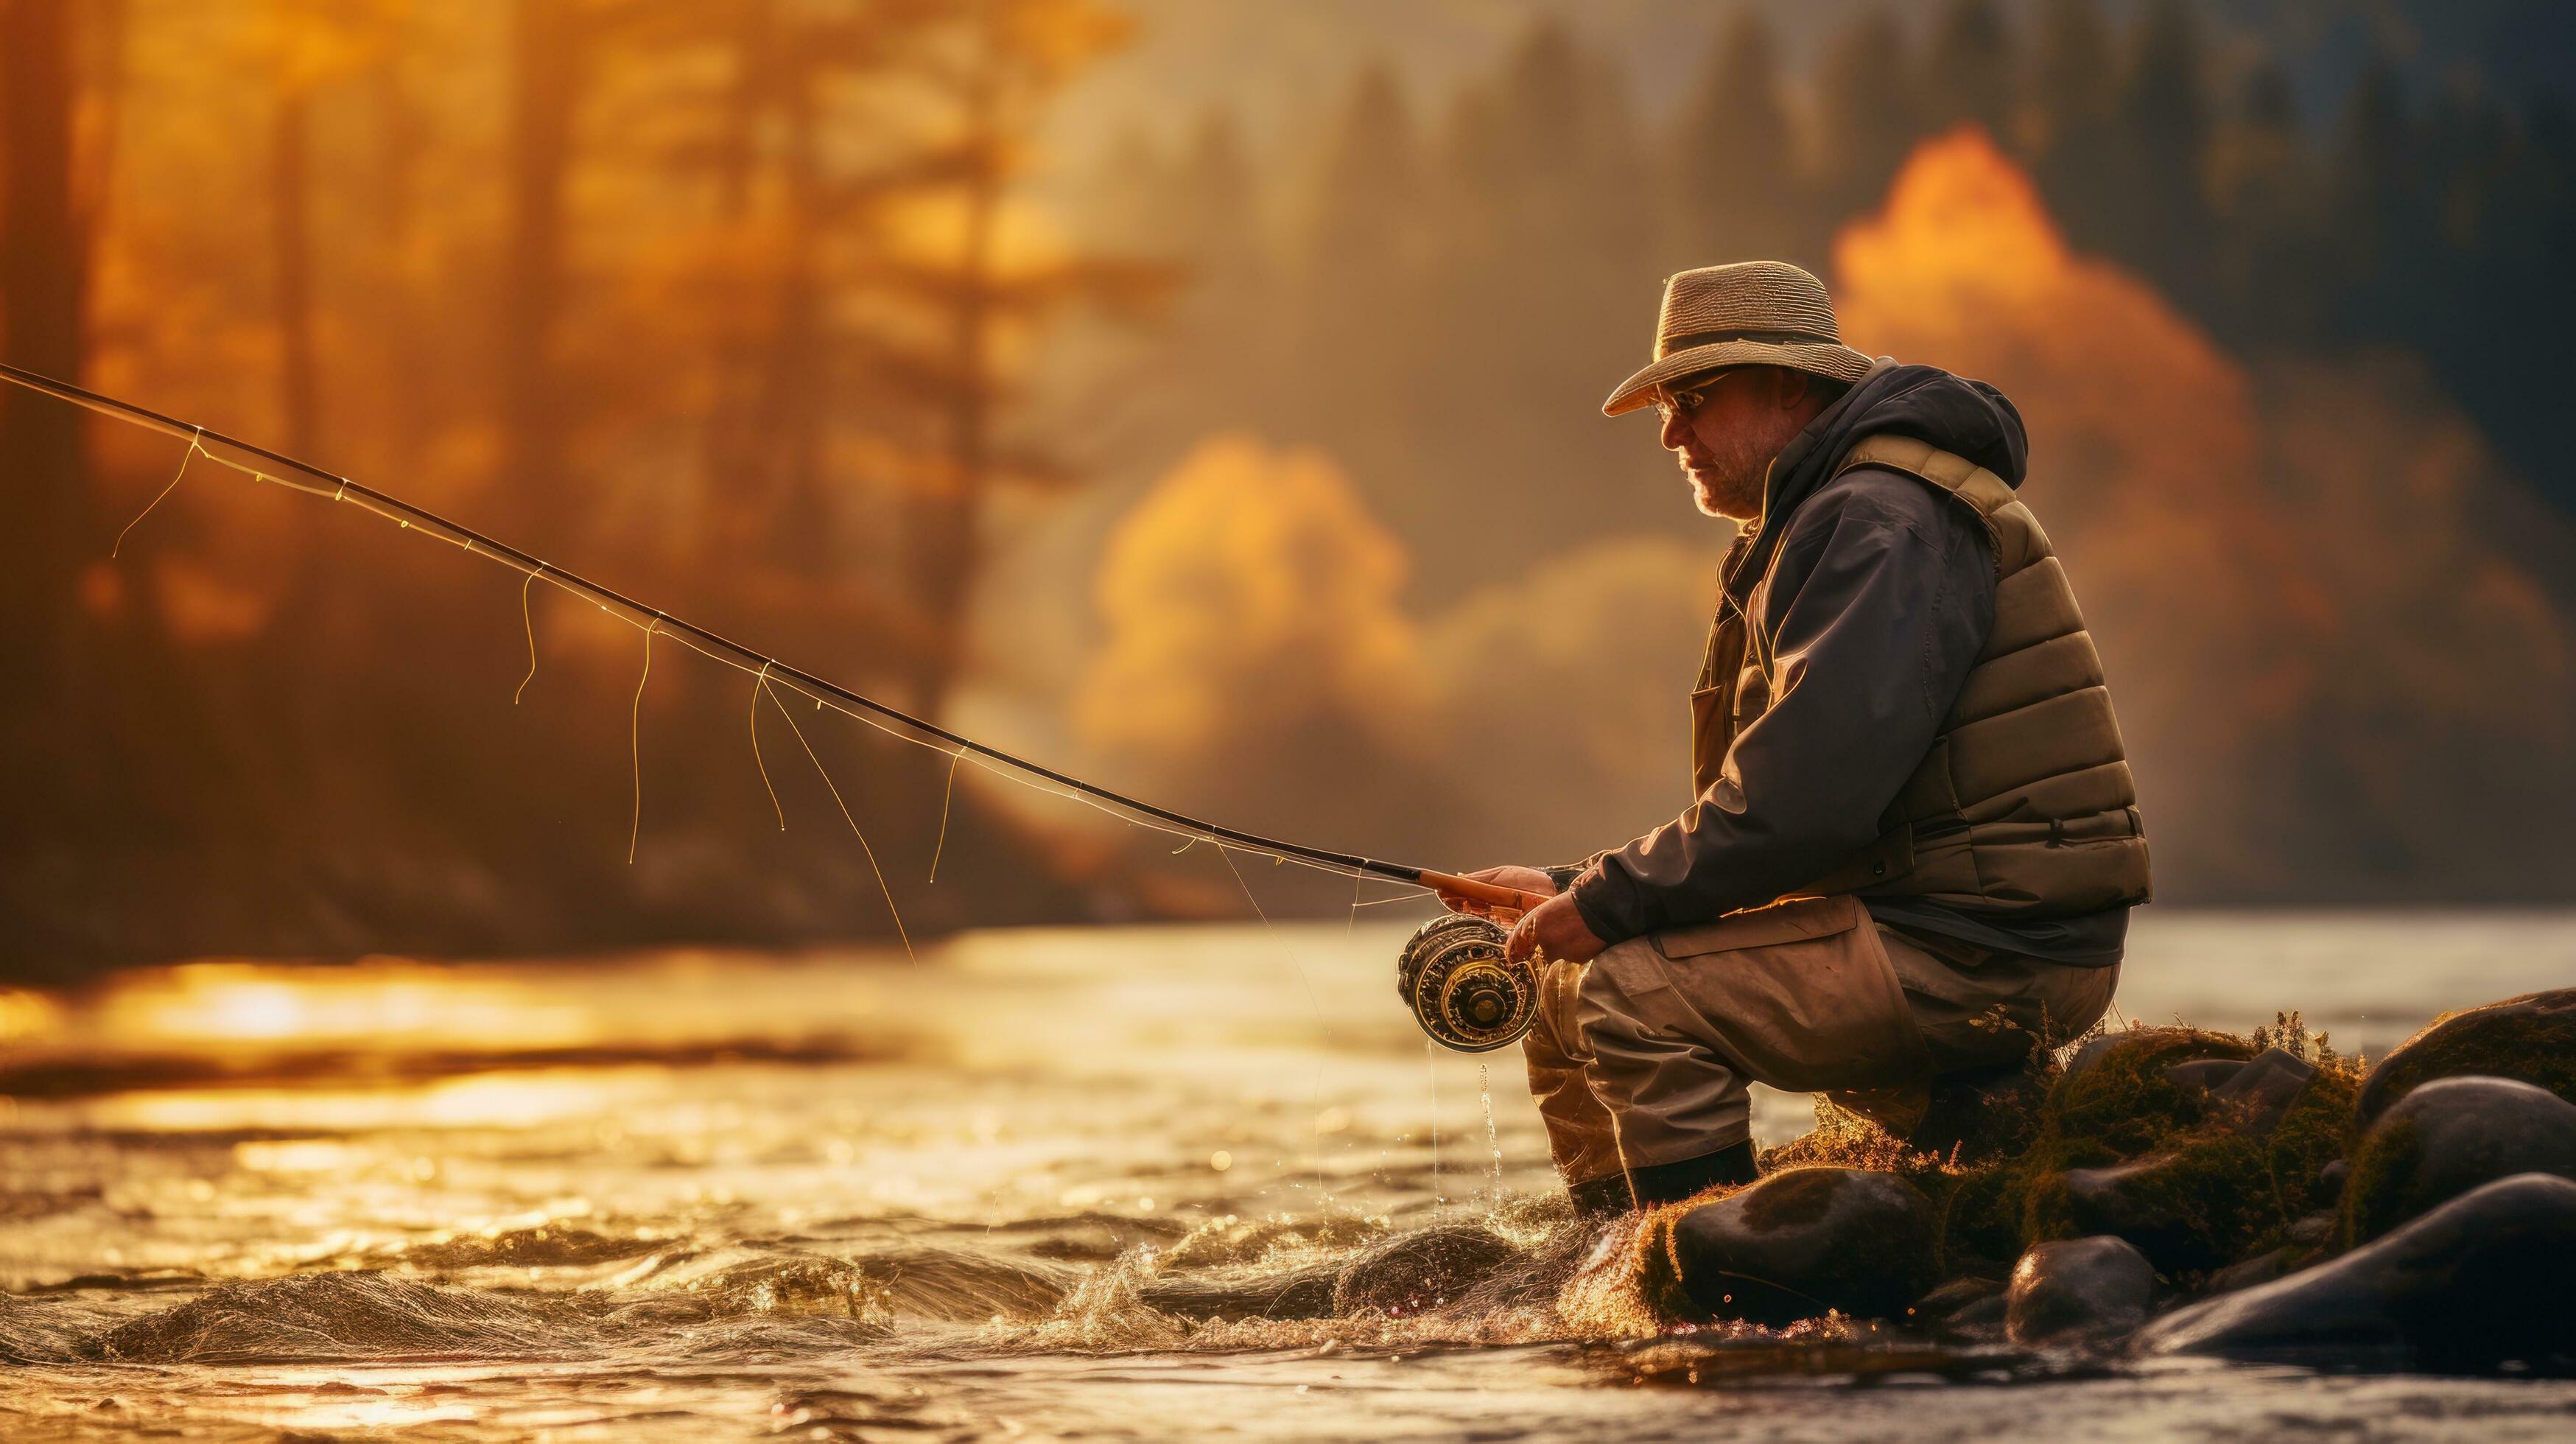 Older man catching a fish while fly fishing in a river 30049399